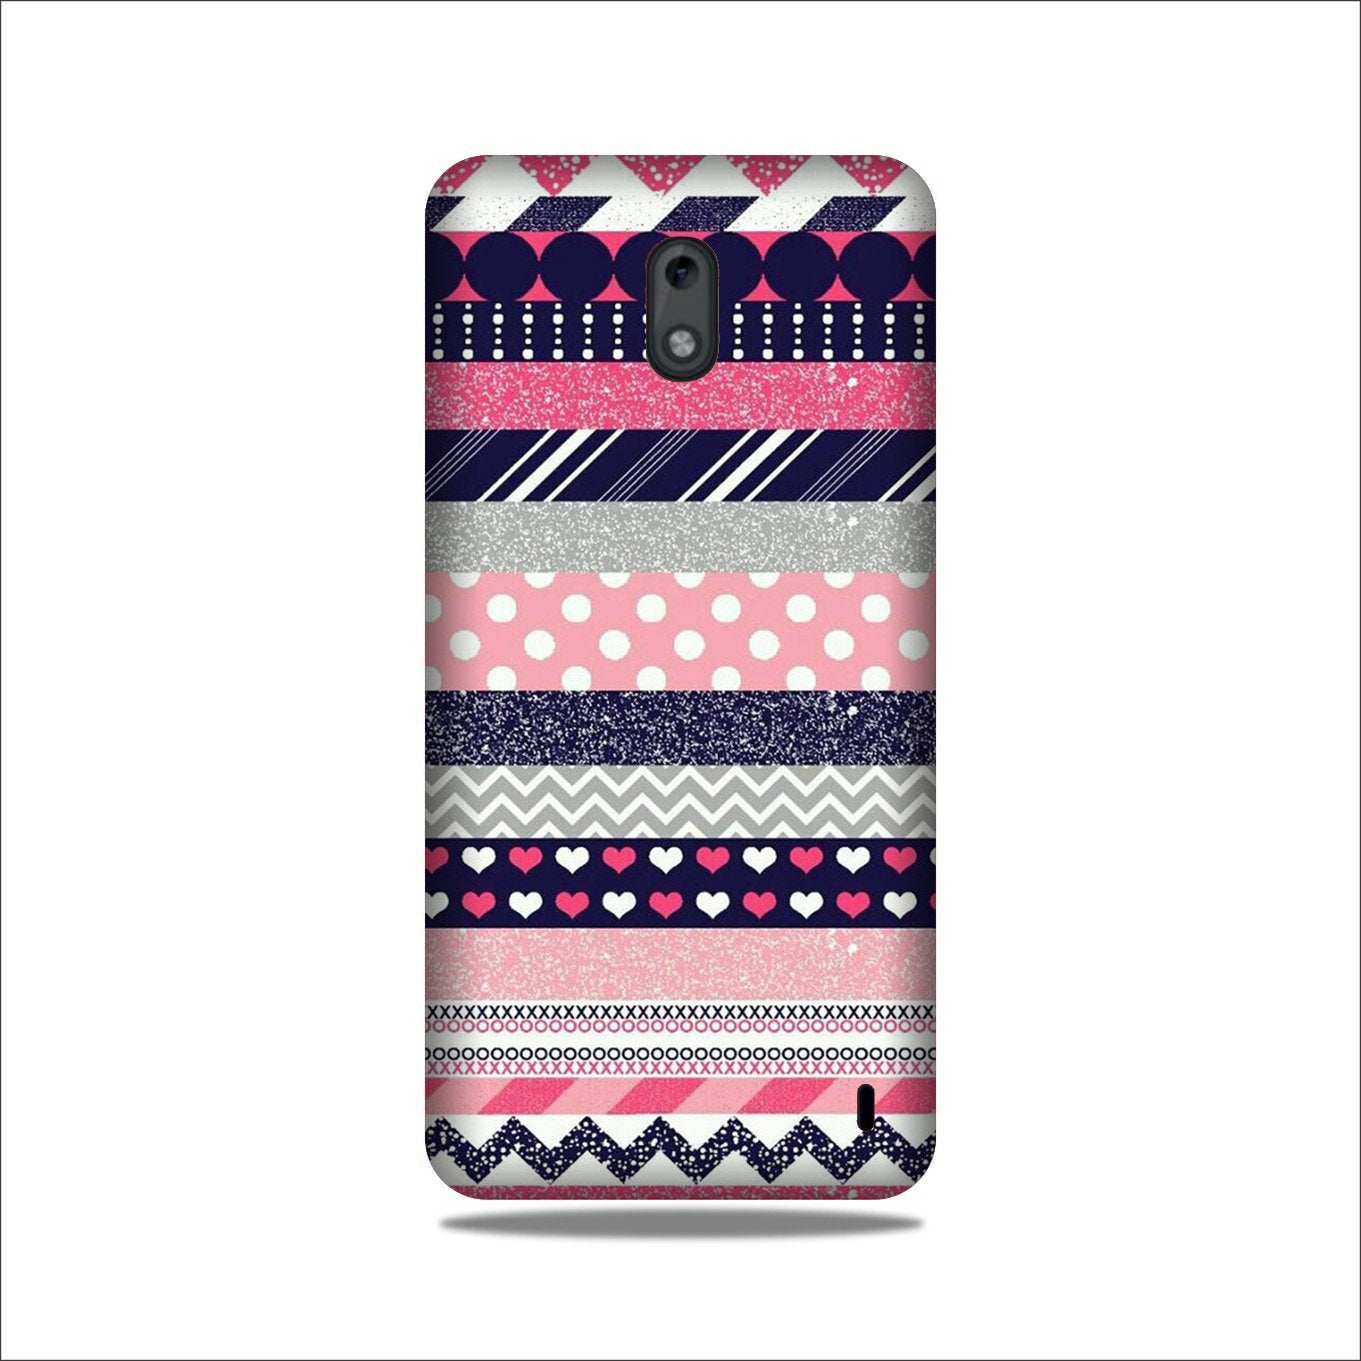 Pattern3 Case for Nokia 3